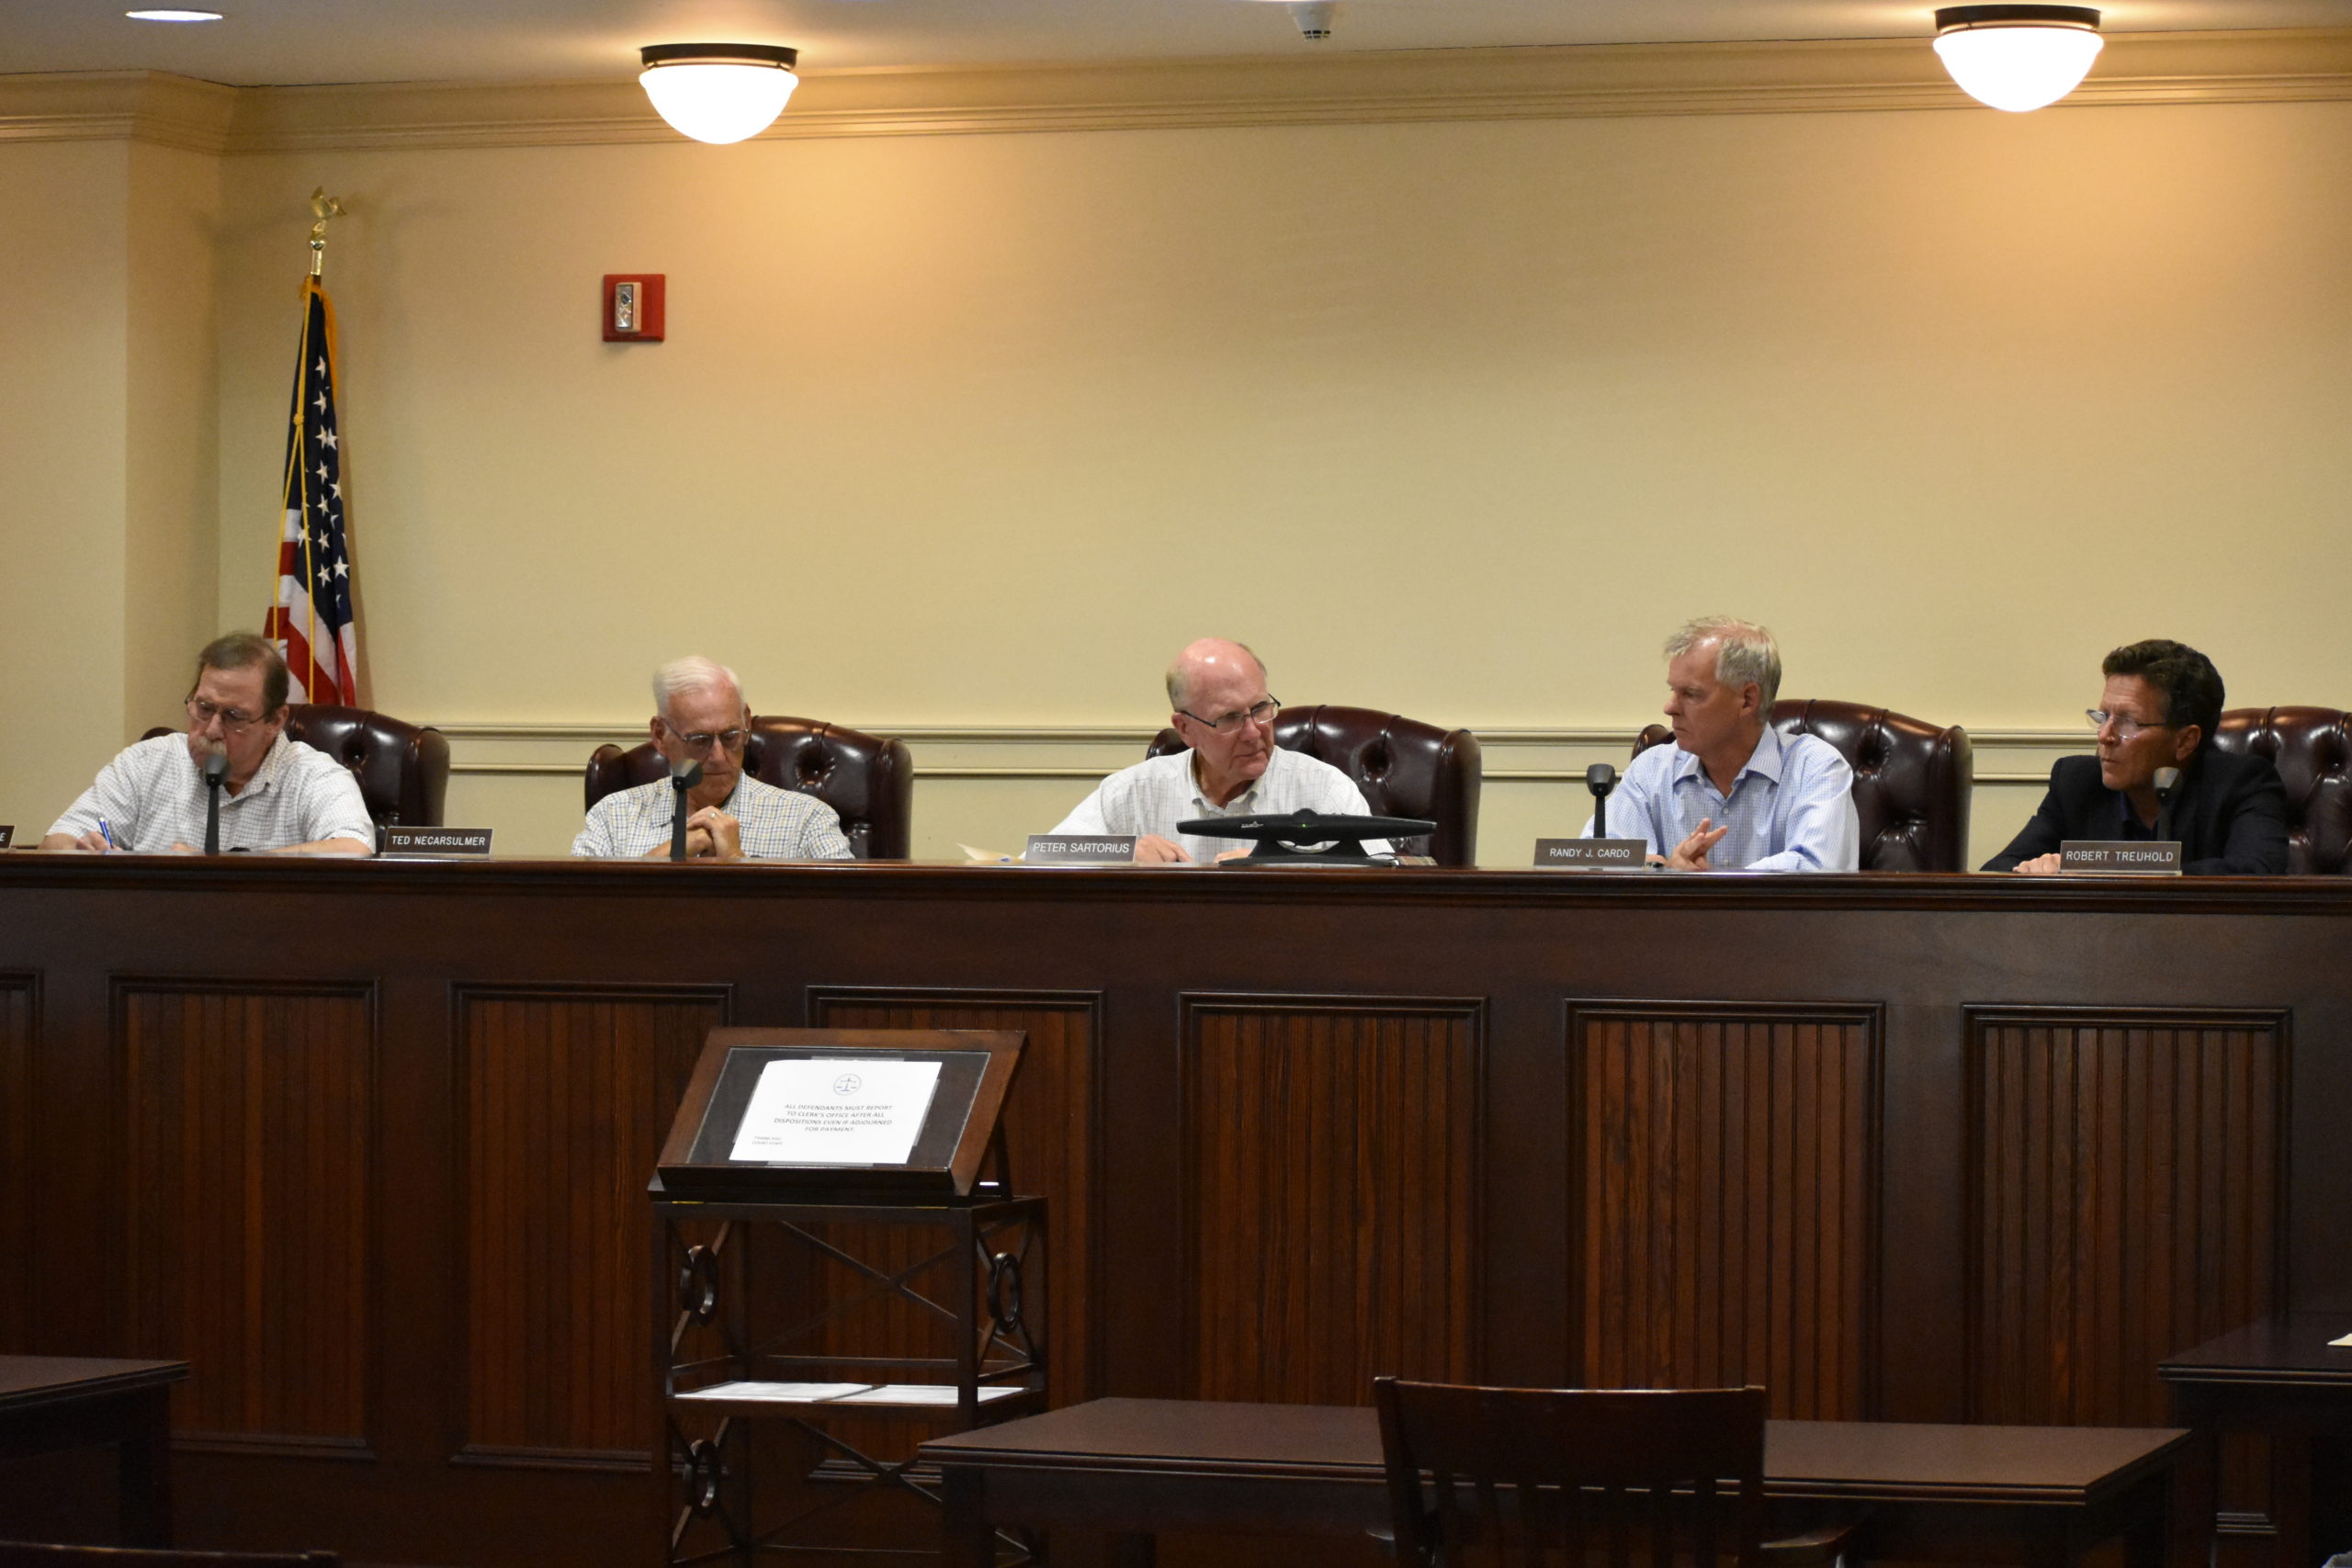 The Quogue Village Board convened for a special meeting on Monday, August 2 to vote on outdoor dining at the Quogue Club.